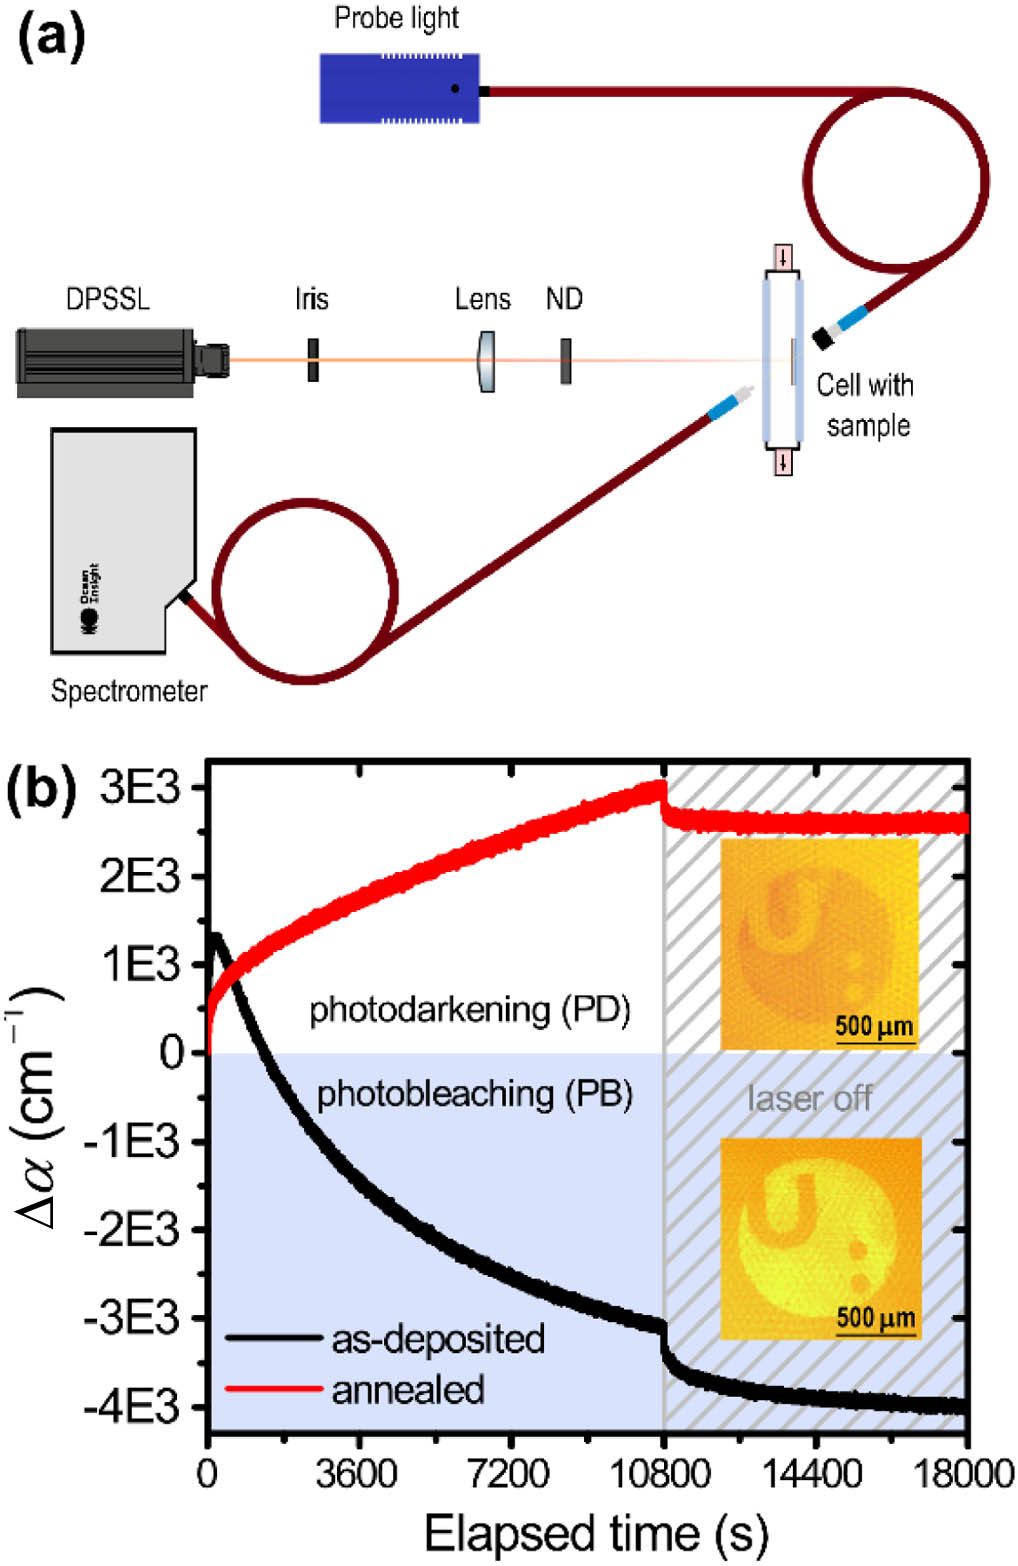 (a) Experimental scheme of irradiation setup for in situ measurements. A pump beam from a DPSS laser is aimed onto the sample through the plano–convex lens, and its desired optical intensity is adjusted by the neutral density filter(s) (ND). (b) Typical time evolution of absorption coefficient Δα(t) for as-deposited film (black) and annealed film (red) upon room-temperature irradiation at laser optical intensity of 125 mW·cm−2; shaded region represents the data acquisition after the laser is switched off; insets with photodarkened (top) and photobleached (bottom) University of Pardubice logo using 1 mm diameter negative stencil (colors are illustrational only without profiling).